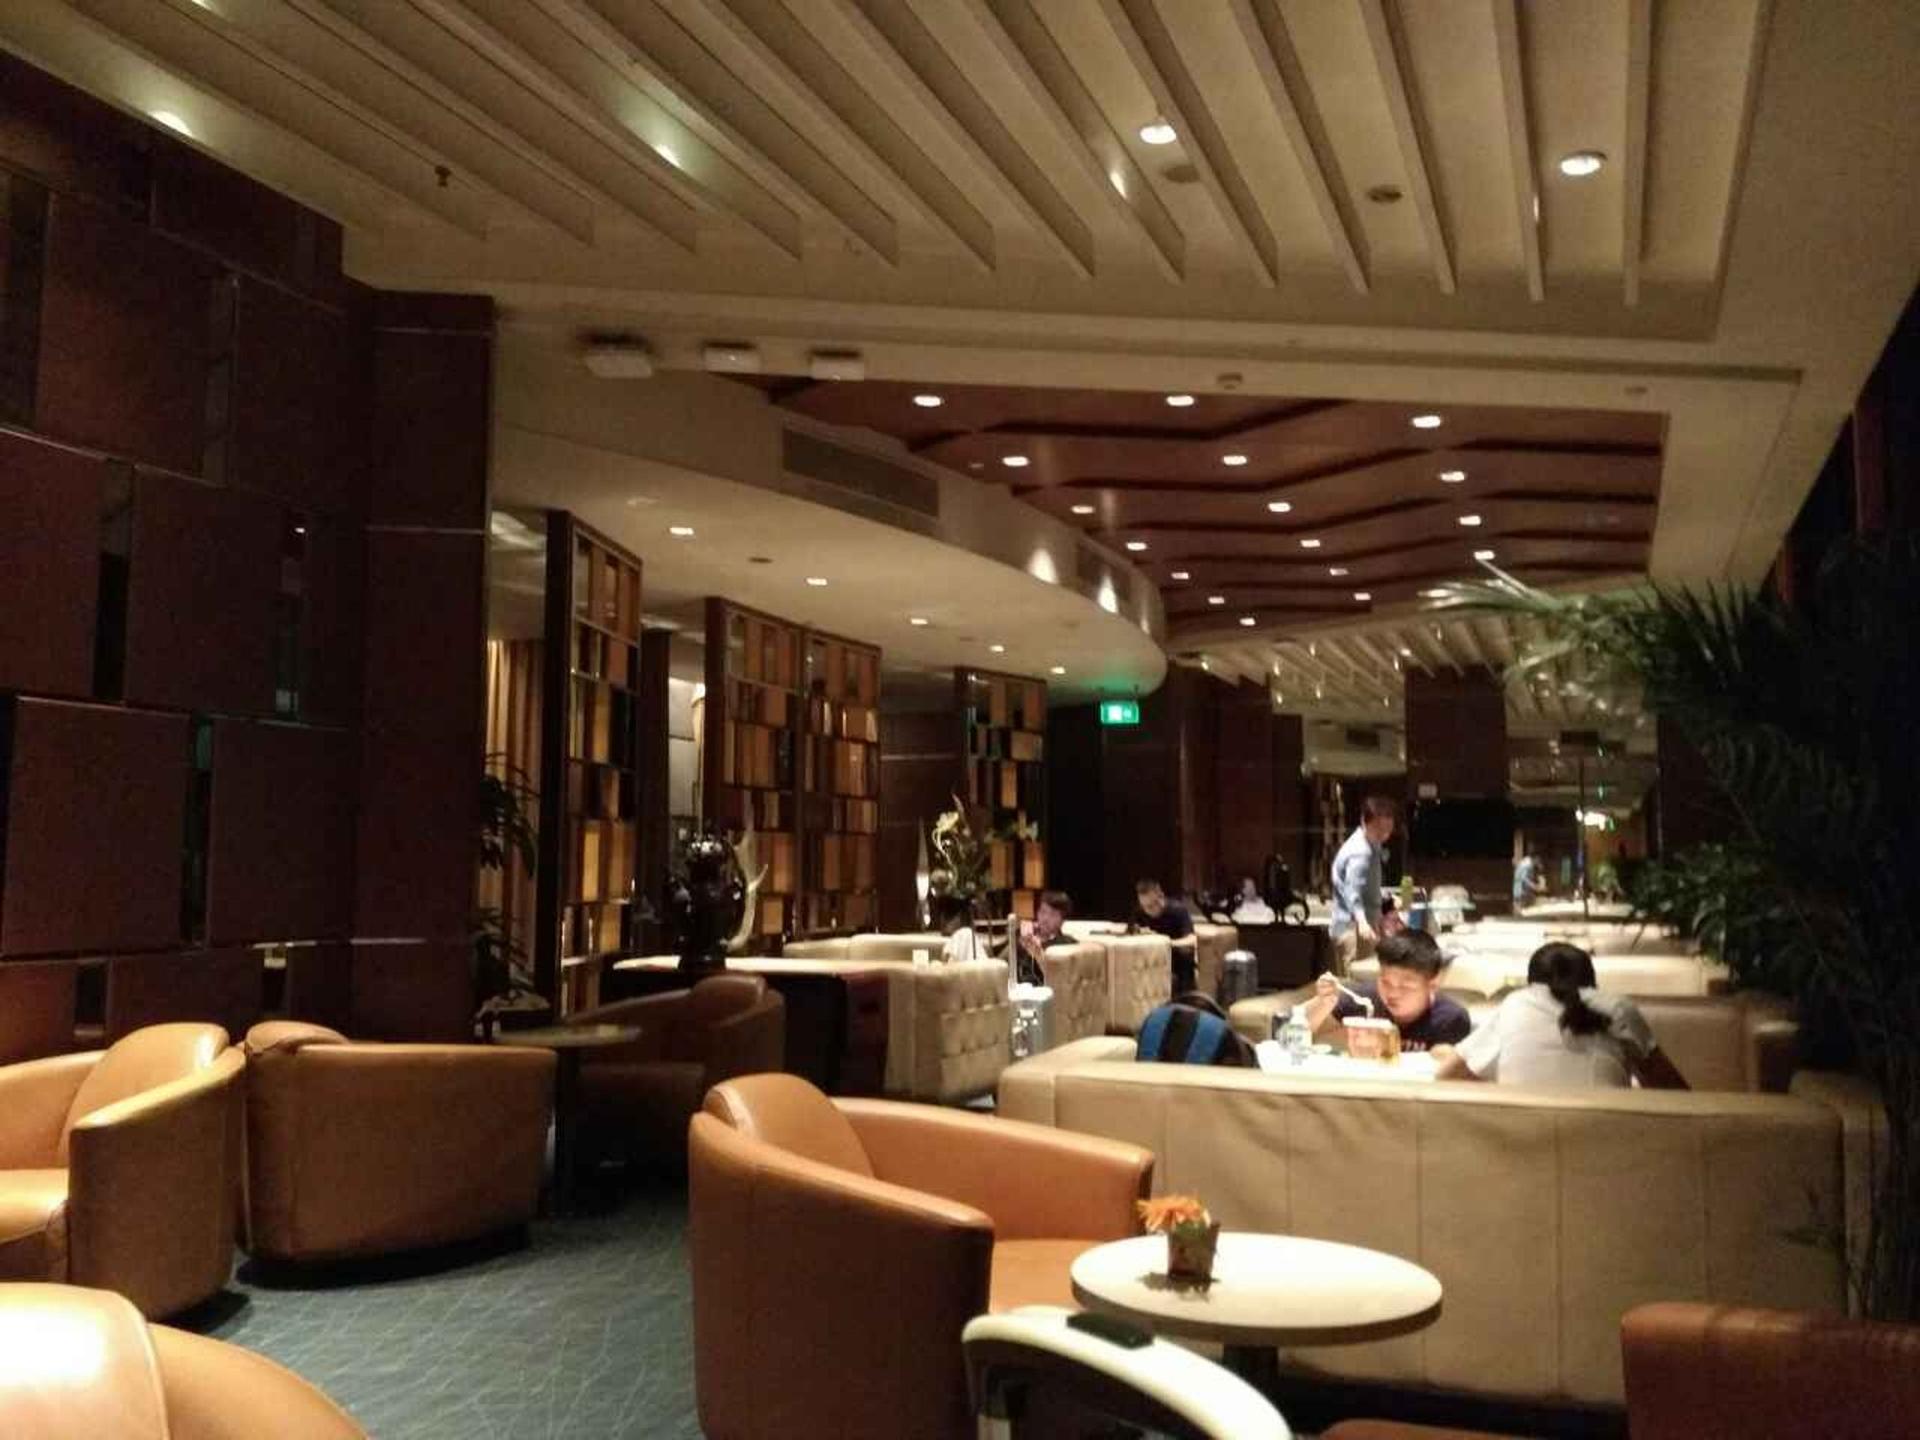 Air China Domestic First & Business Class Lounge image 1 of 1